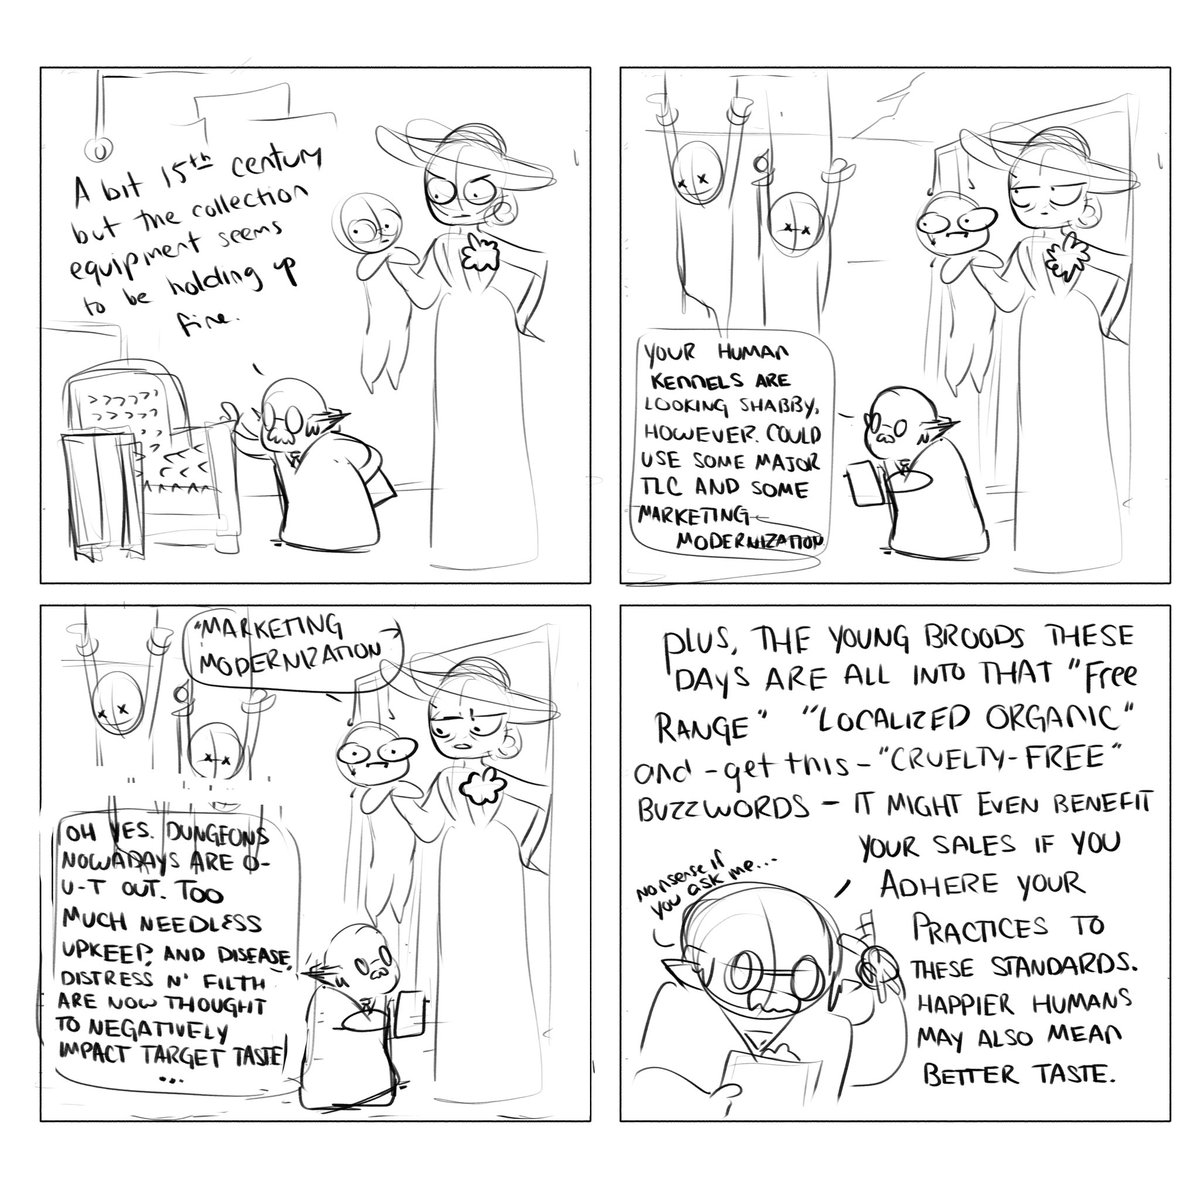 Fun fact, the original draft for this joke was roughly 3 pages long. 3 pages into 4 panels for essentially the exact same joke about horrible wine vampires doing horrible things in the most haute bourgeoisie way possible 